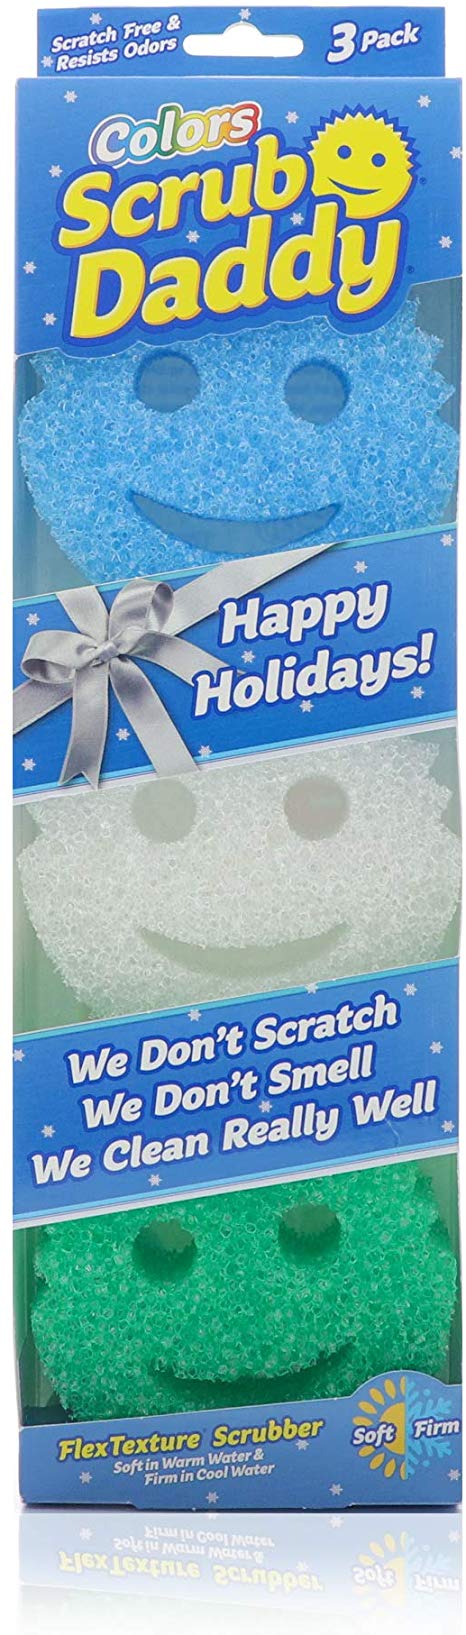 Scrub Daddy Sponge Set - FlexTexture Sponge, Soft in Warm Water, Firm in Cold, Deep Cleaning, Dishwasher Safe, Multi-use, Scratch Free, Odor Resistant, Functional, Ergonomic, 3ct (Holiday Colors)